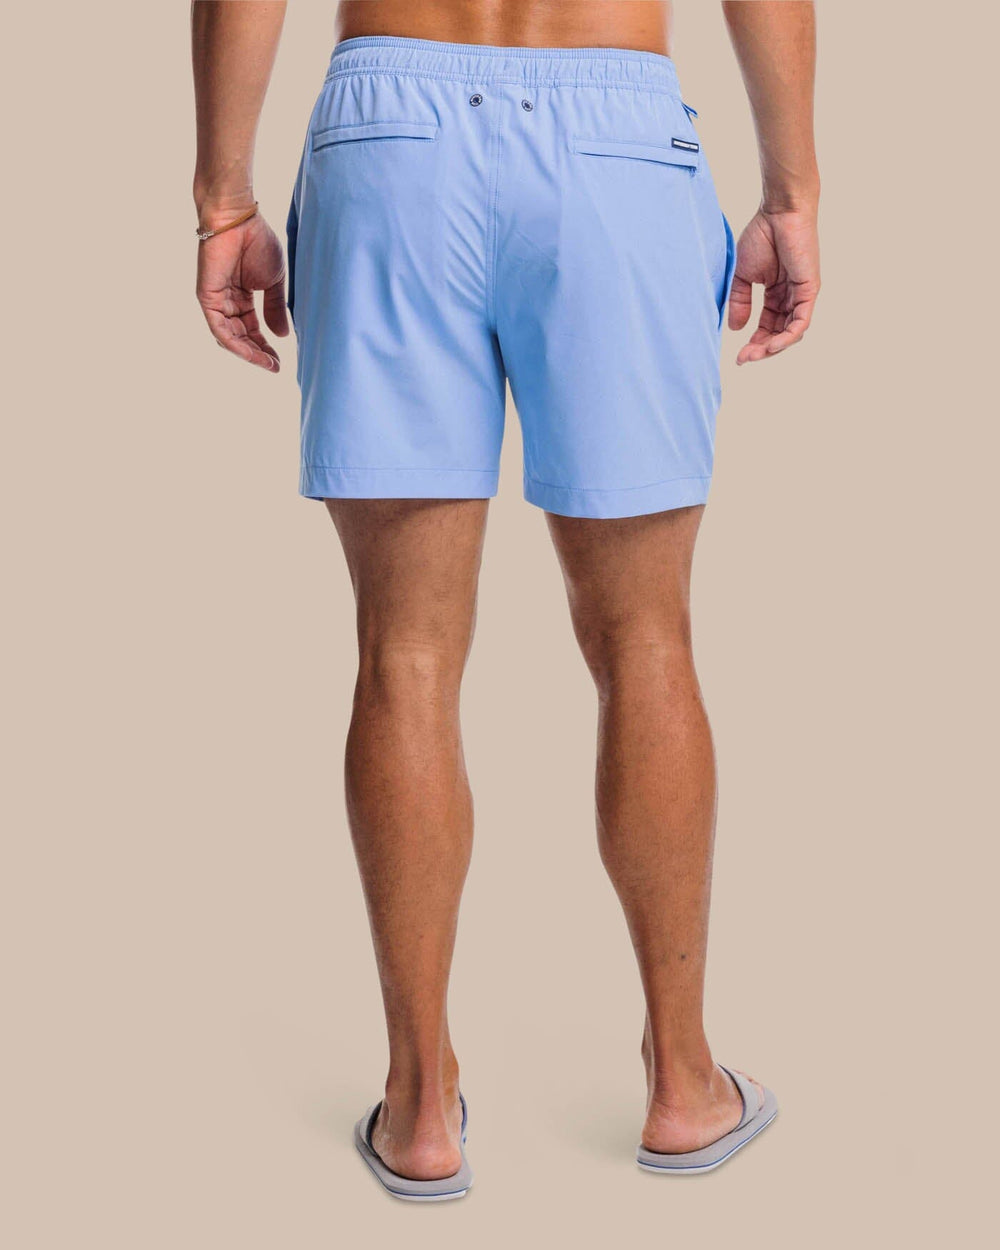 The back view of the Southern Tide Solid Swim Trunk 3 by Southern Tide - Ocean Channel